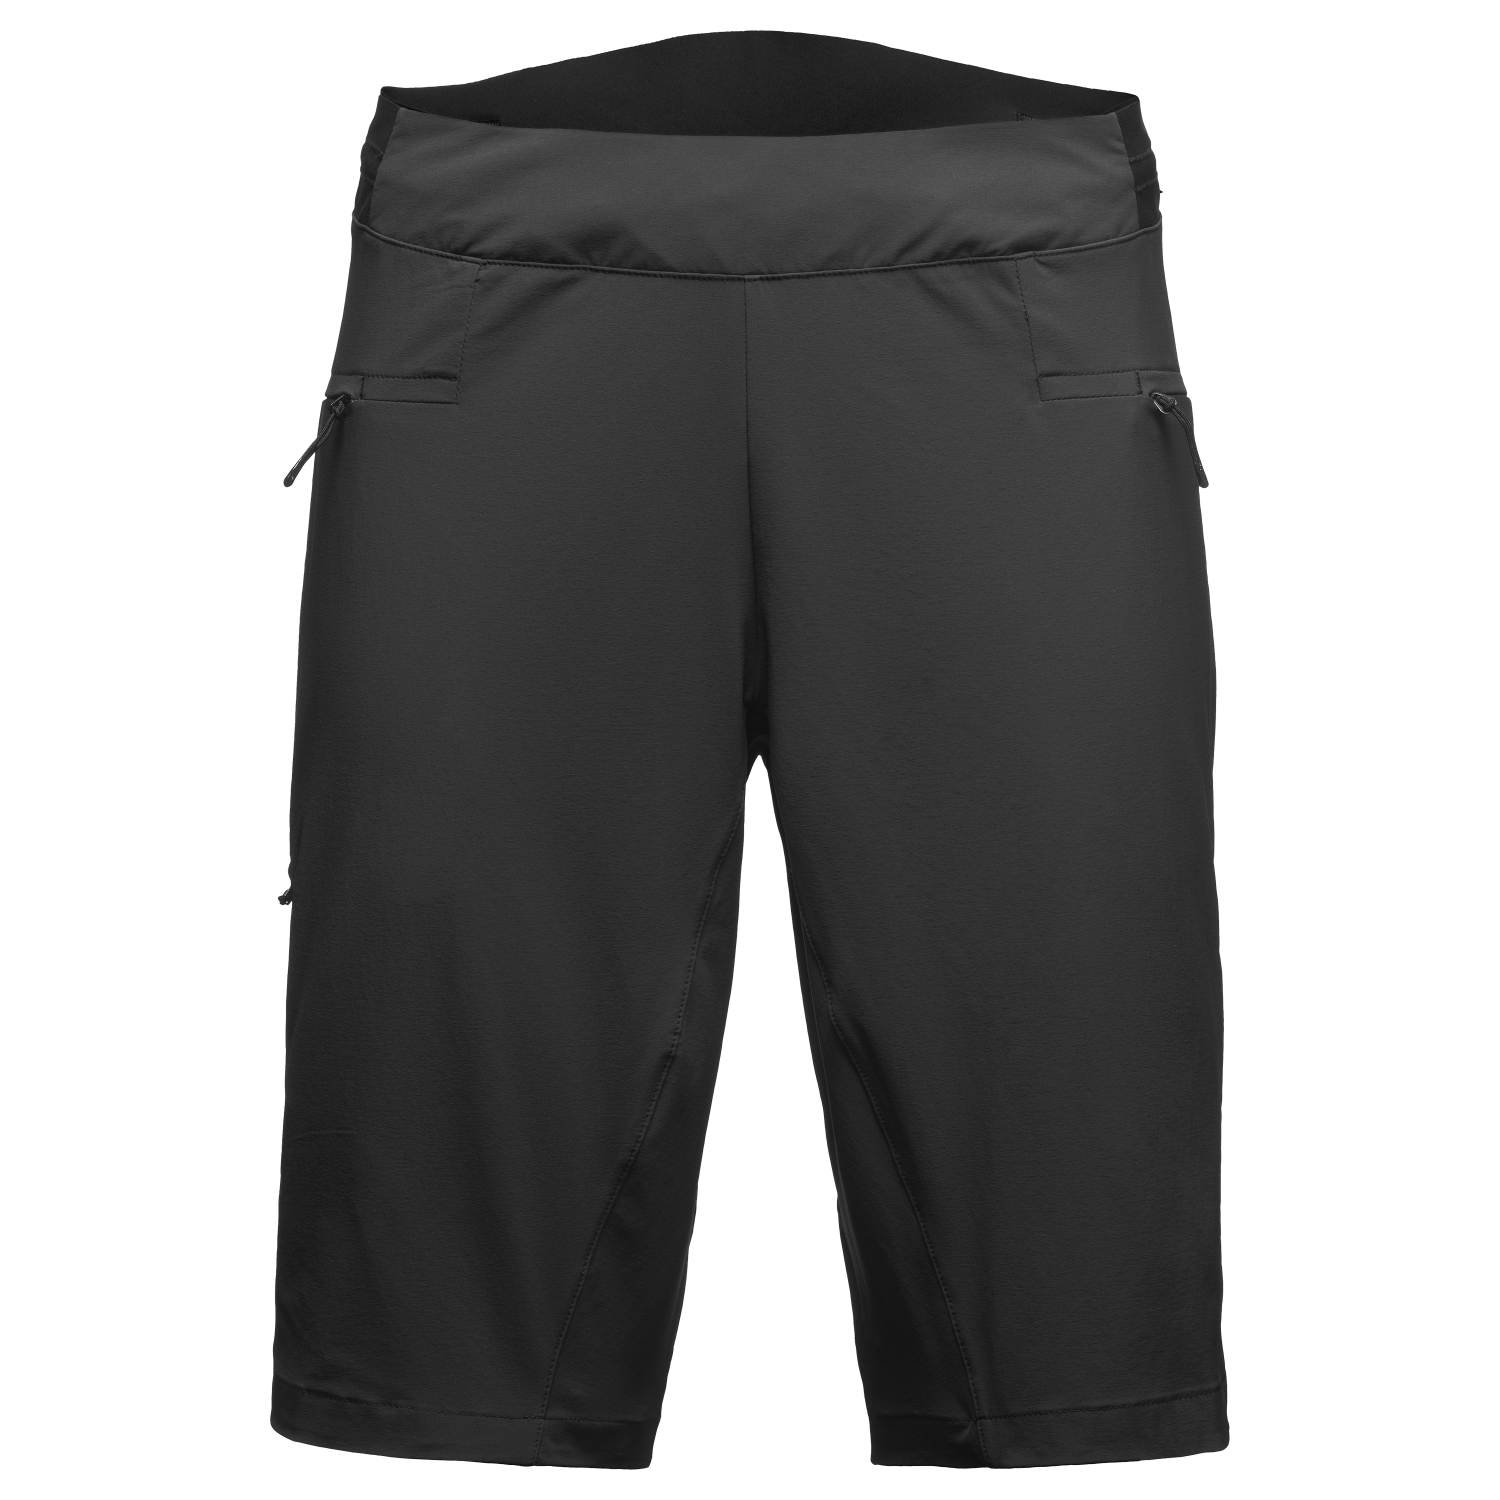 GOREWEAR Explore Cycling Shorts Women's in Black | Small (4-6) | Slim fit